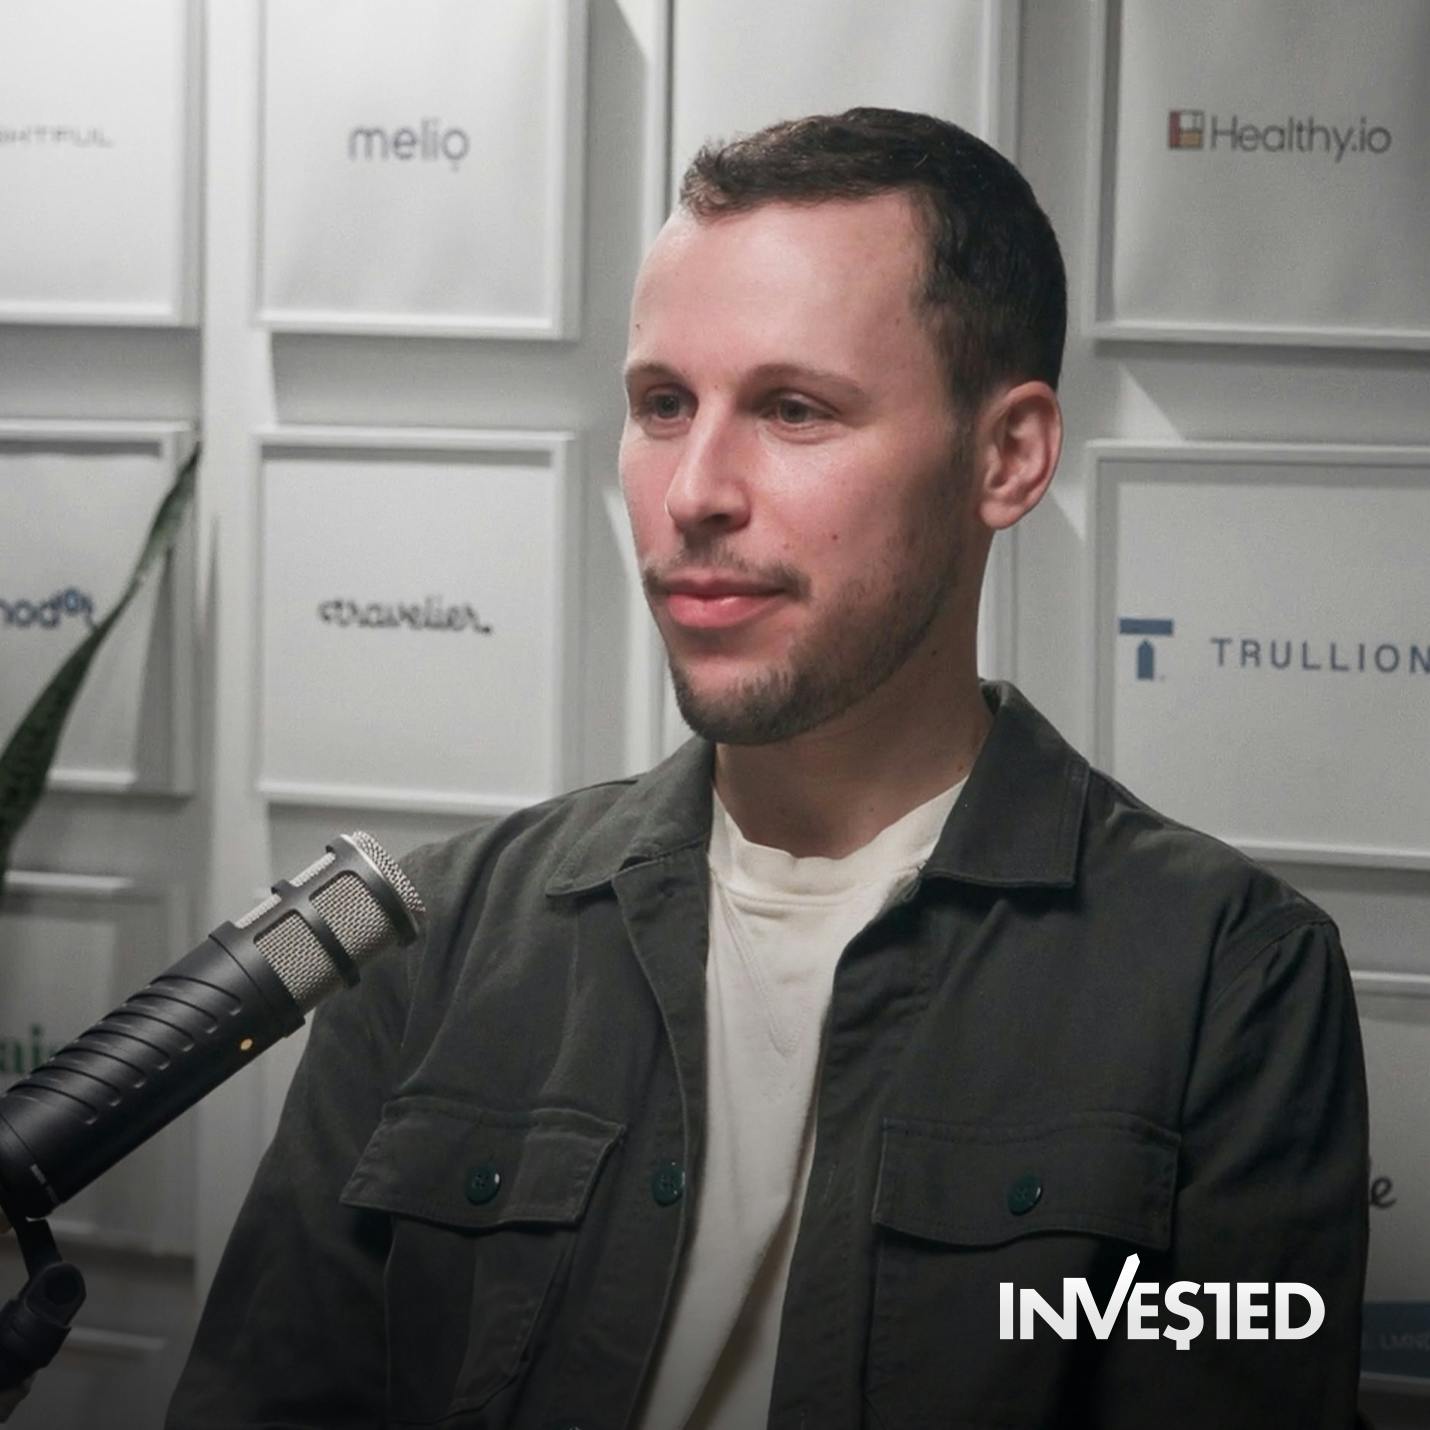 Ben Lang on Being Early at Notion, How to Build Community, Angel Investing and Taking Risks